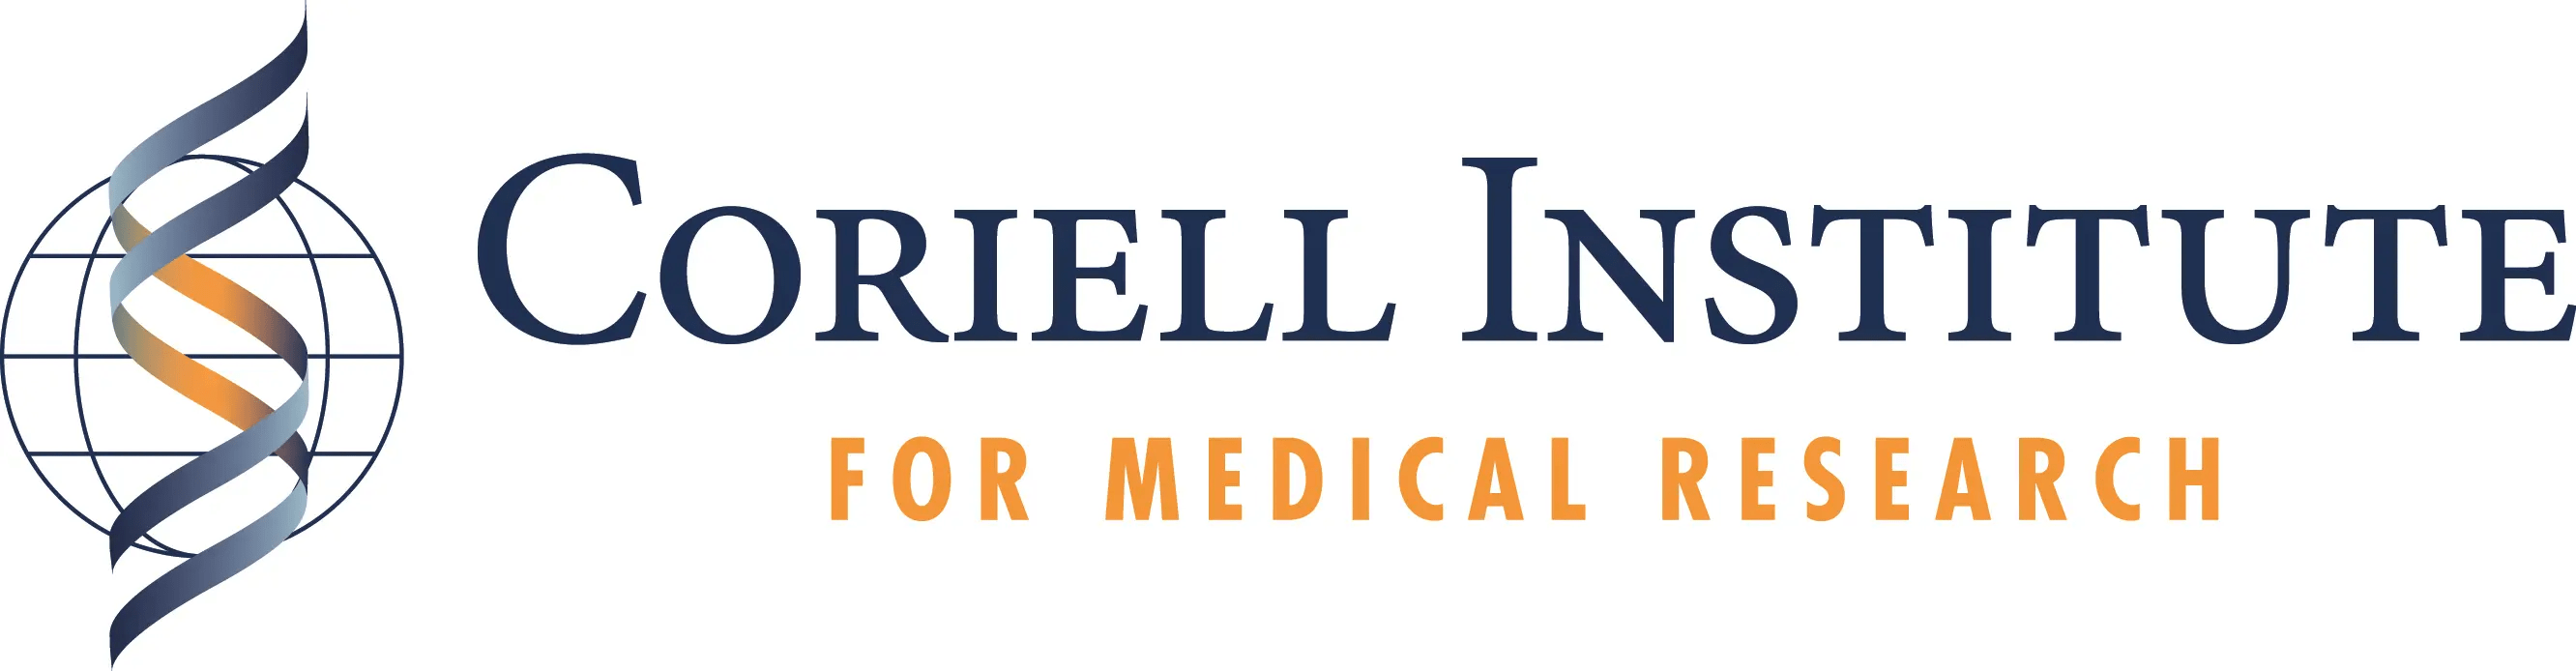 Coriell Institute for Medical Research